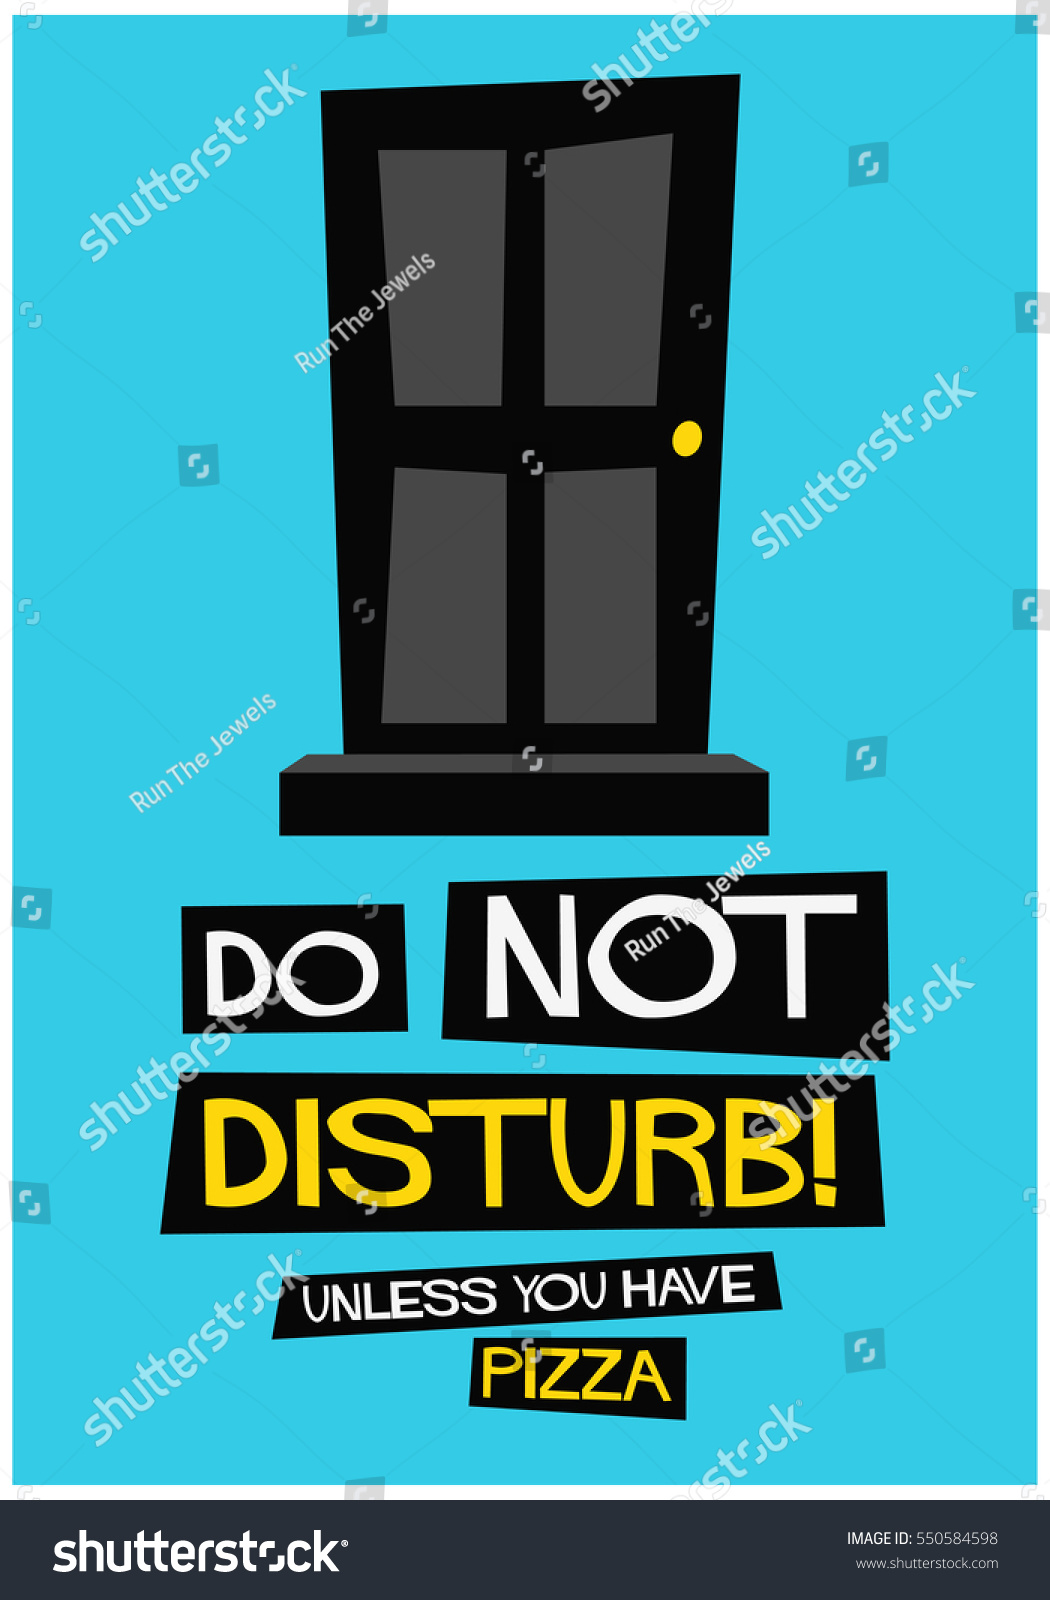 Do Not Disturb Door Unless You Have Pizza (Flat Style Vector Illustration Funny Quote Poster Design) #550584598